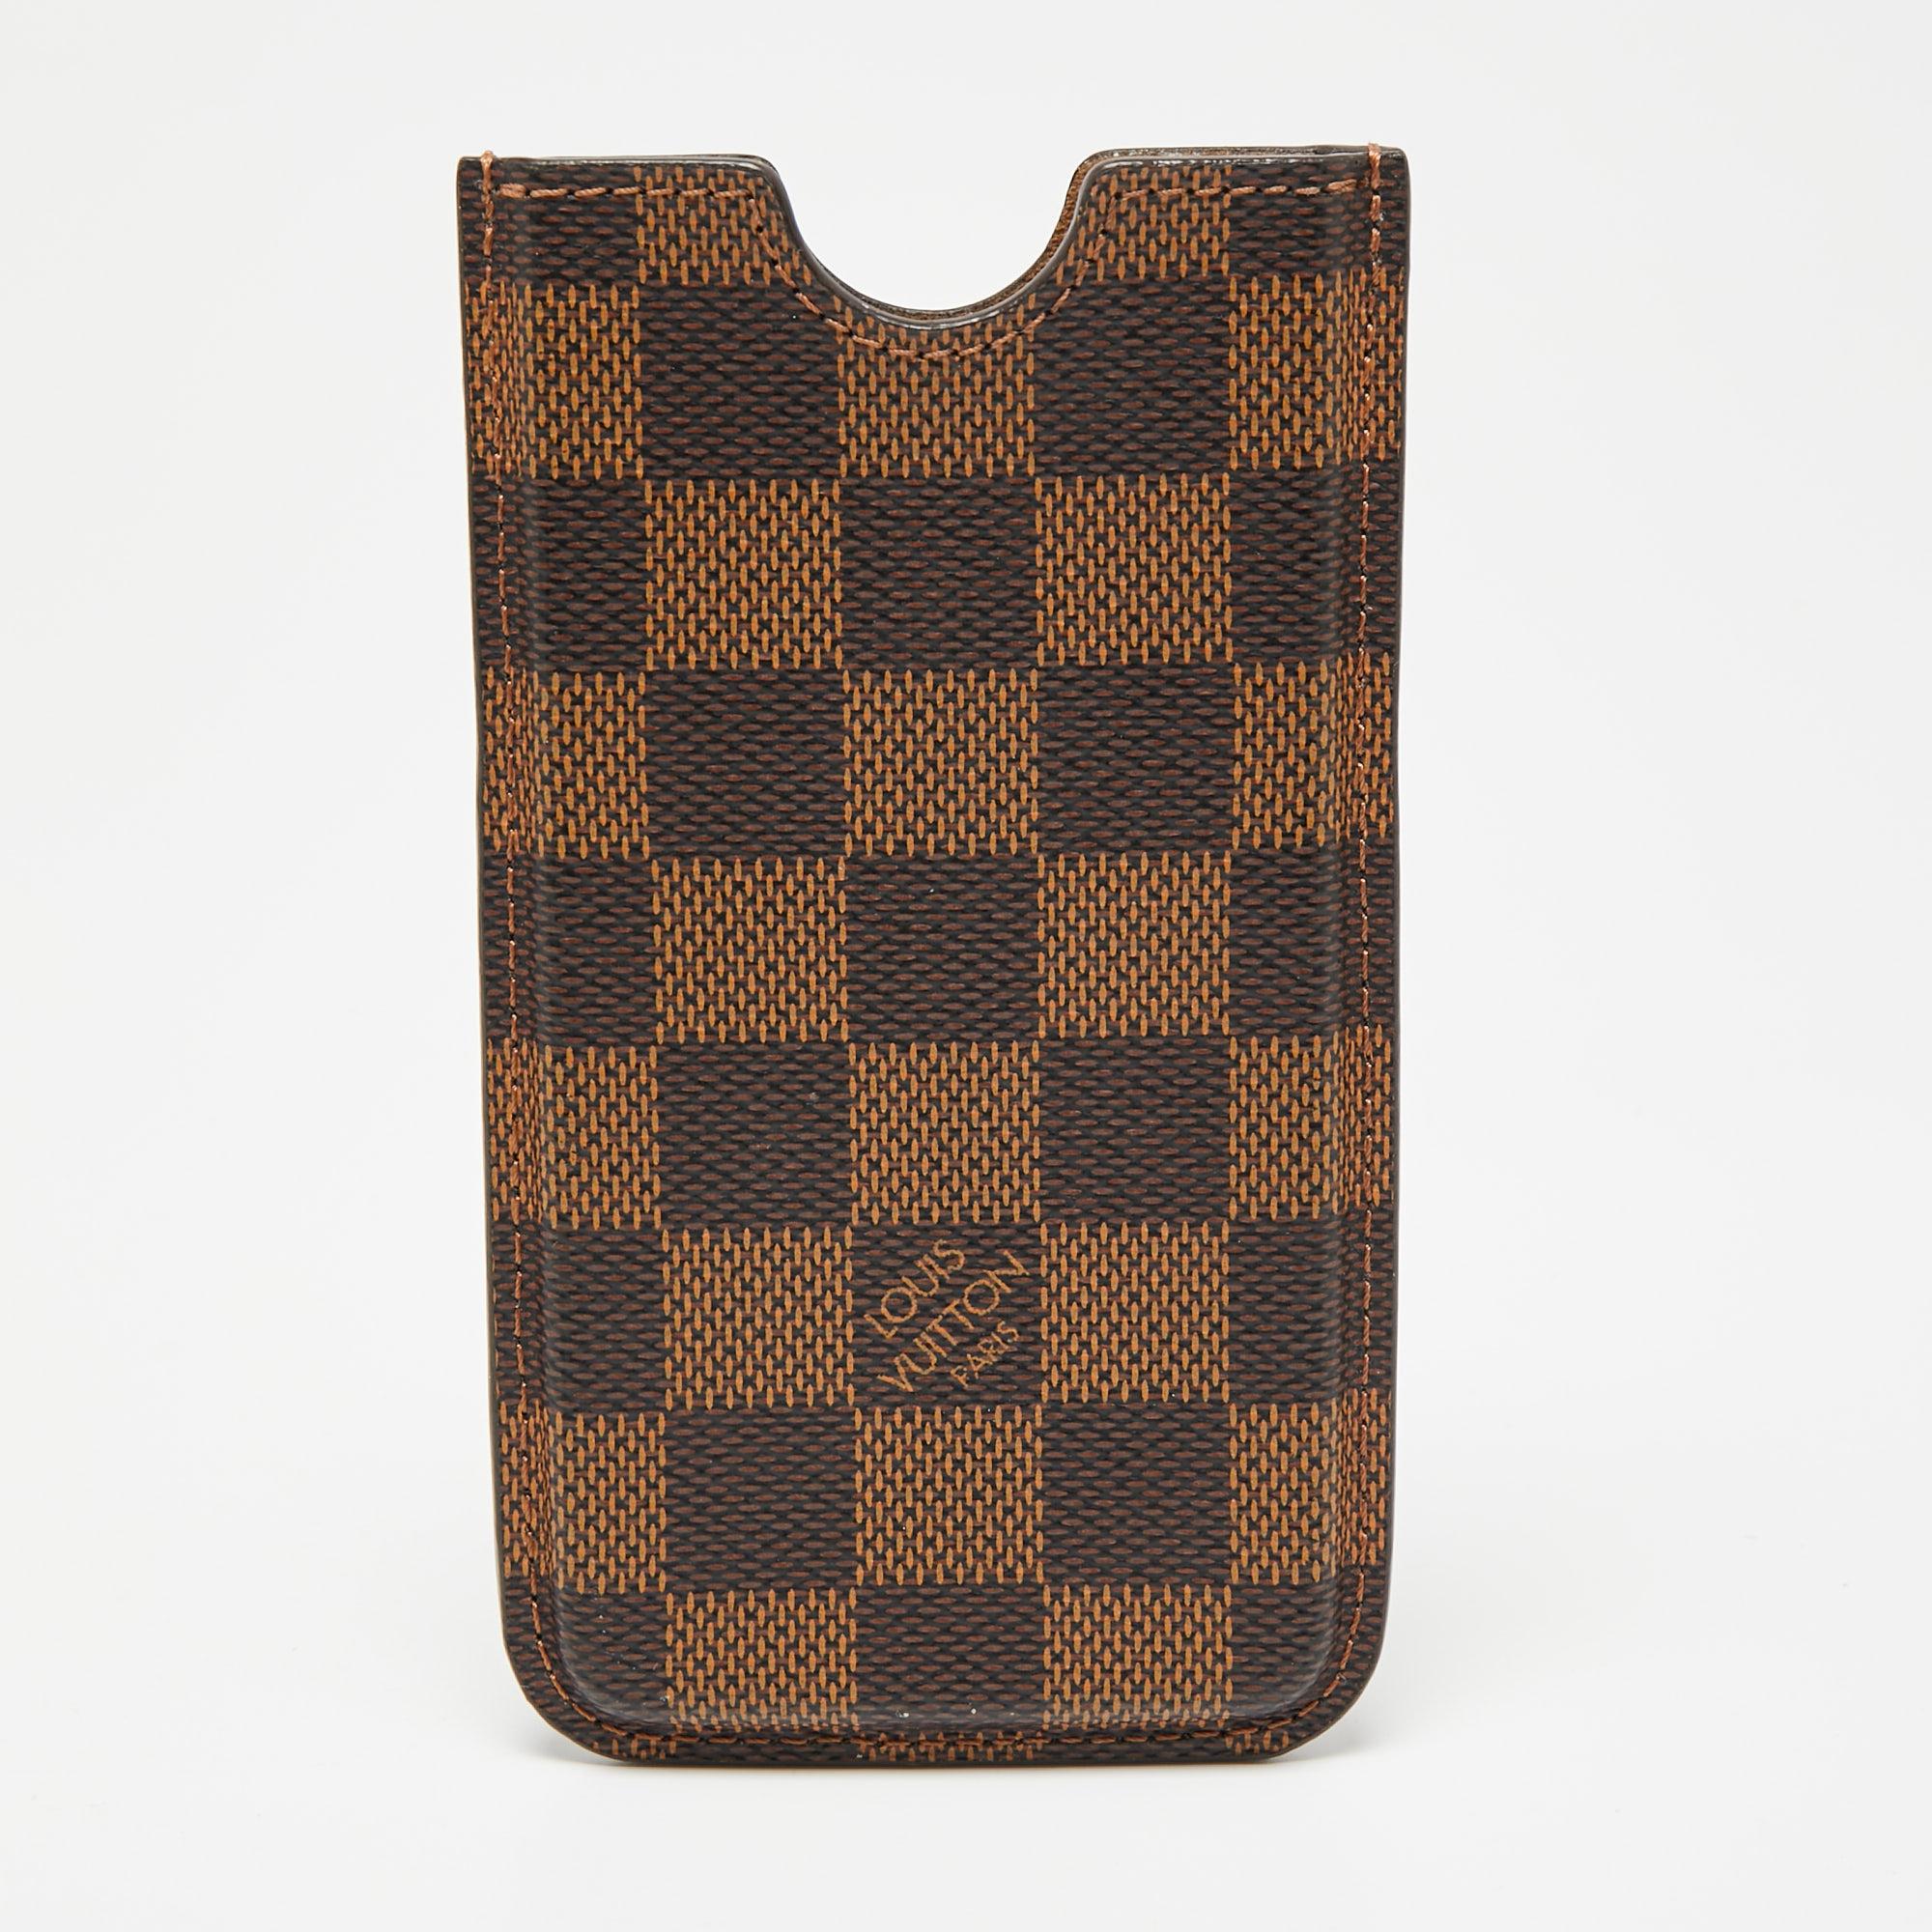 What's not to love about items that are both functional and worthy to be flaunted! This lovely Louis Vuitton cover has been designed smartly to safeguard your phone from any bumps, scratches, and dust. Made from Damier Ebene canvas, the case will